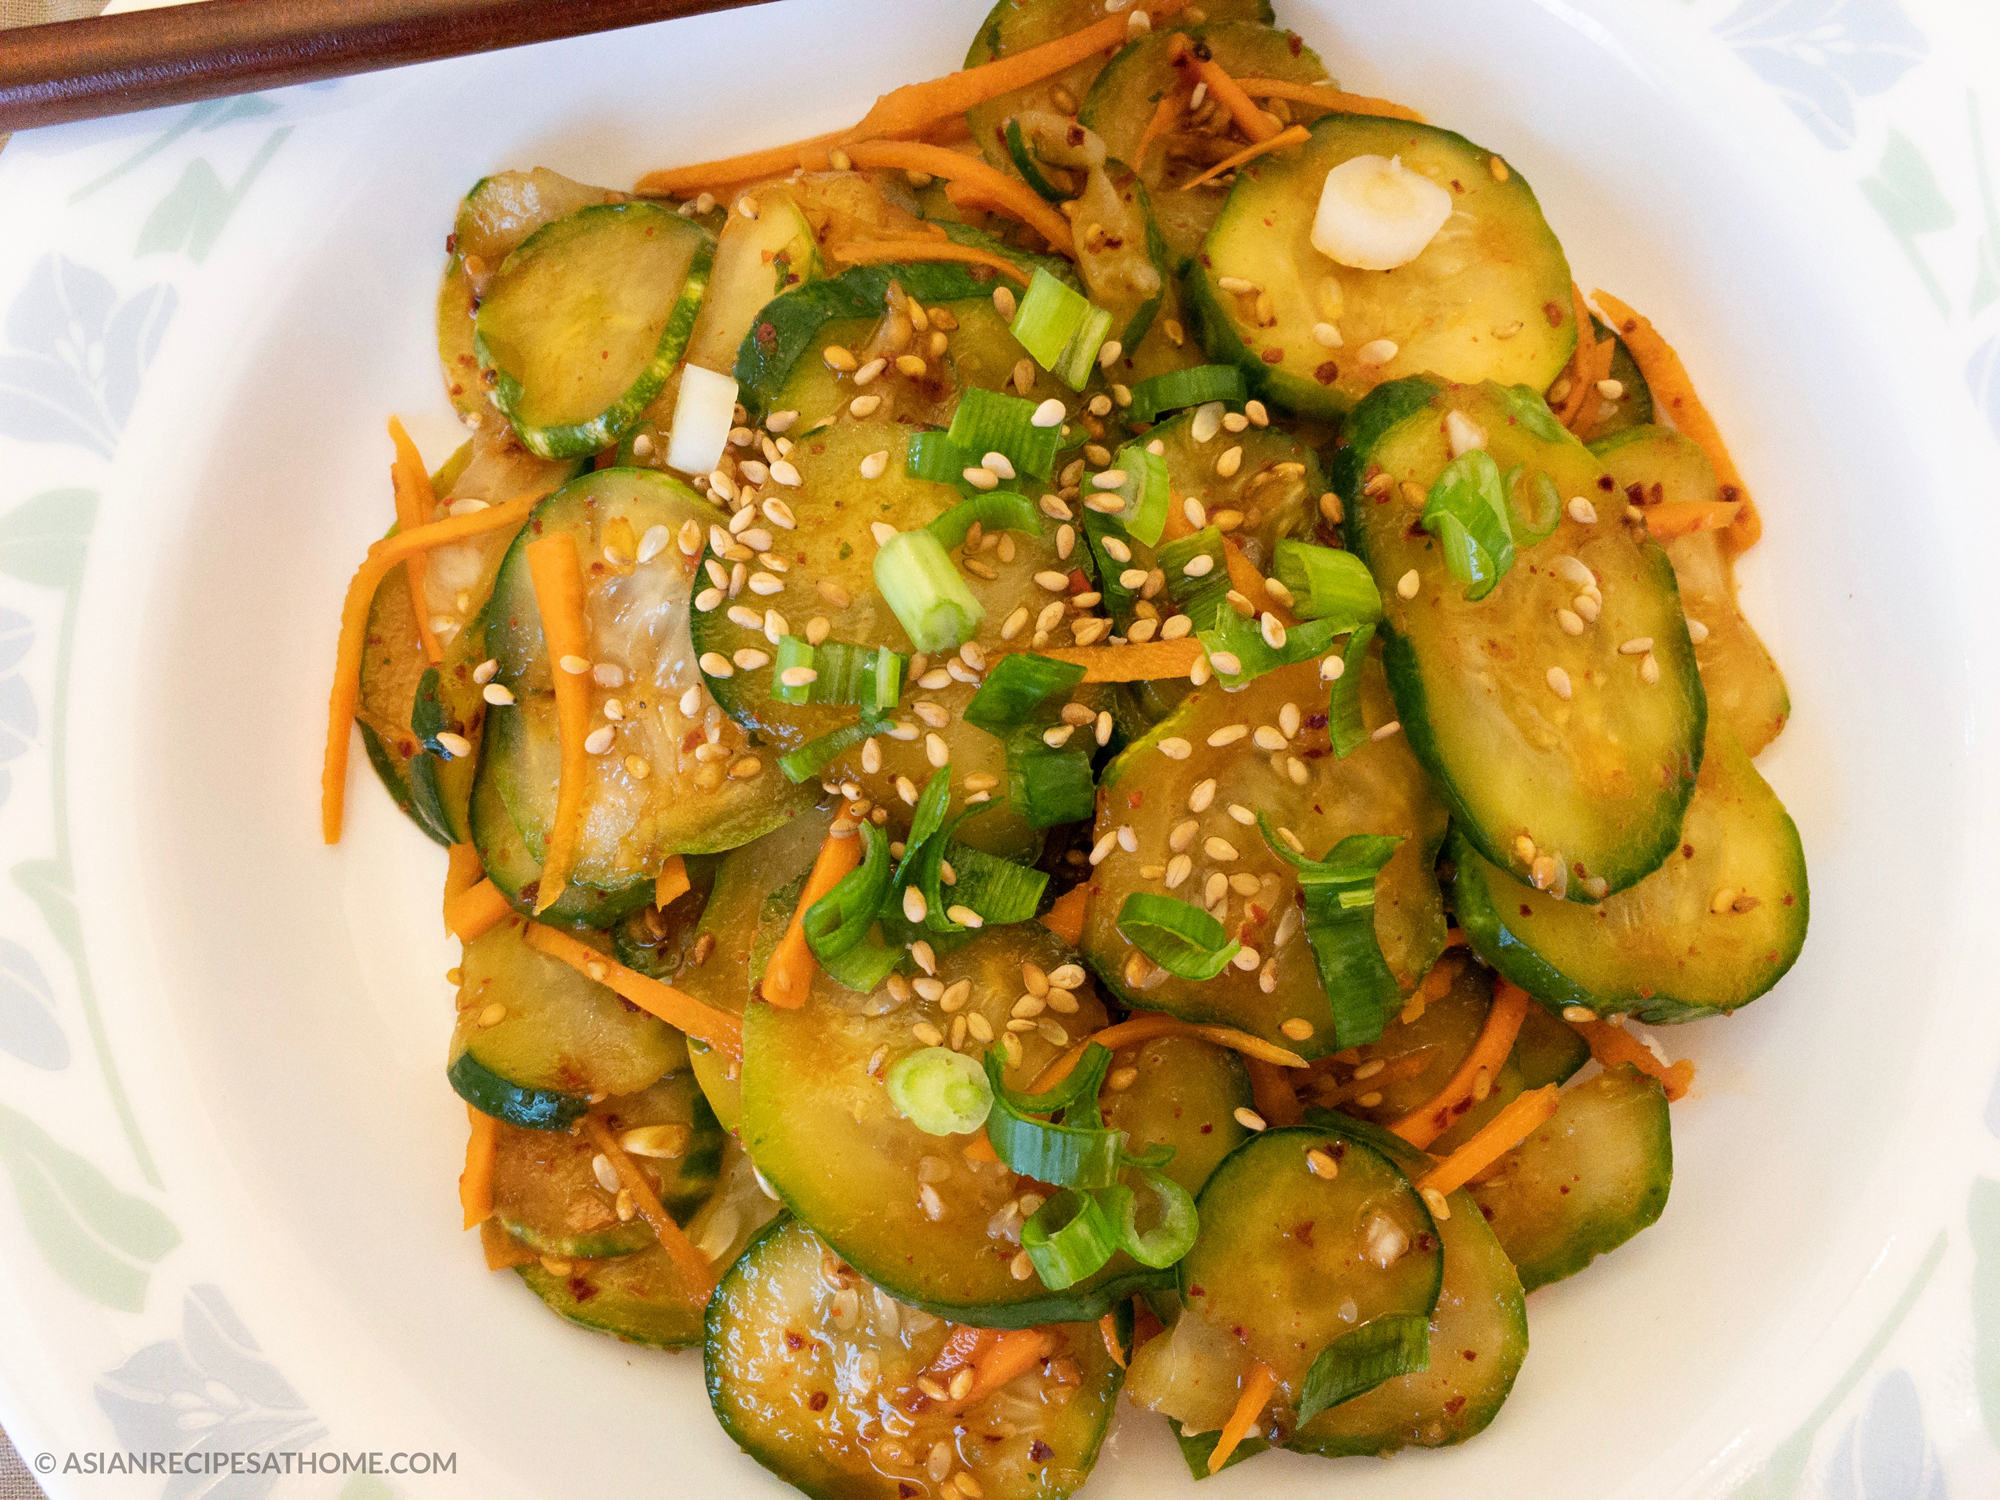 Spicy Korean Cucumber Salad - This fresh, simple and delicious spicy Korean cucumber salad is so easy to make, and just happens to be gluten-free, vegetarian, soy-free and vegan recipe from AsianRecipesAtHome.com.